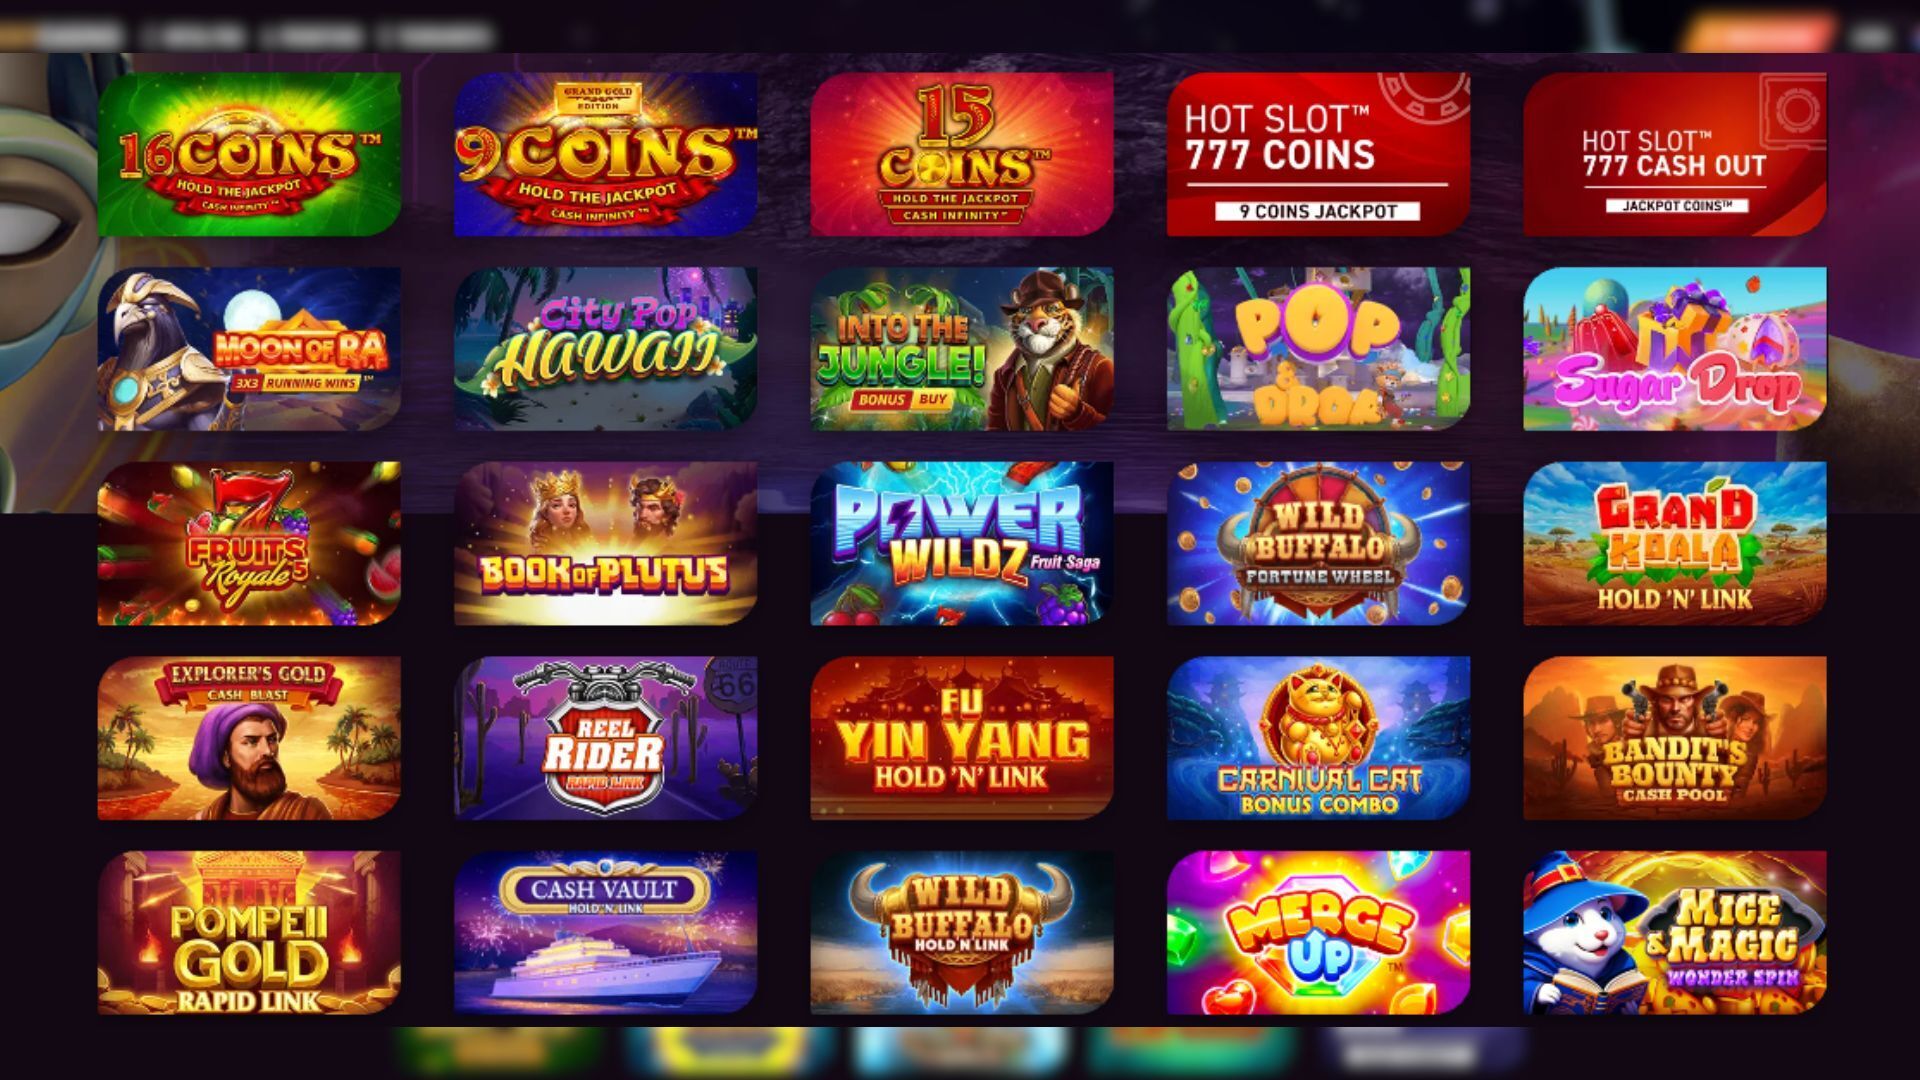 This is a screenshot of the Ricky Casino Online Pokies in Australia